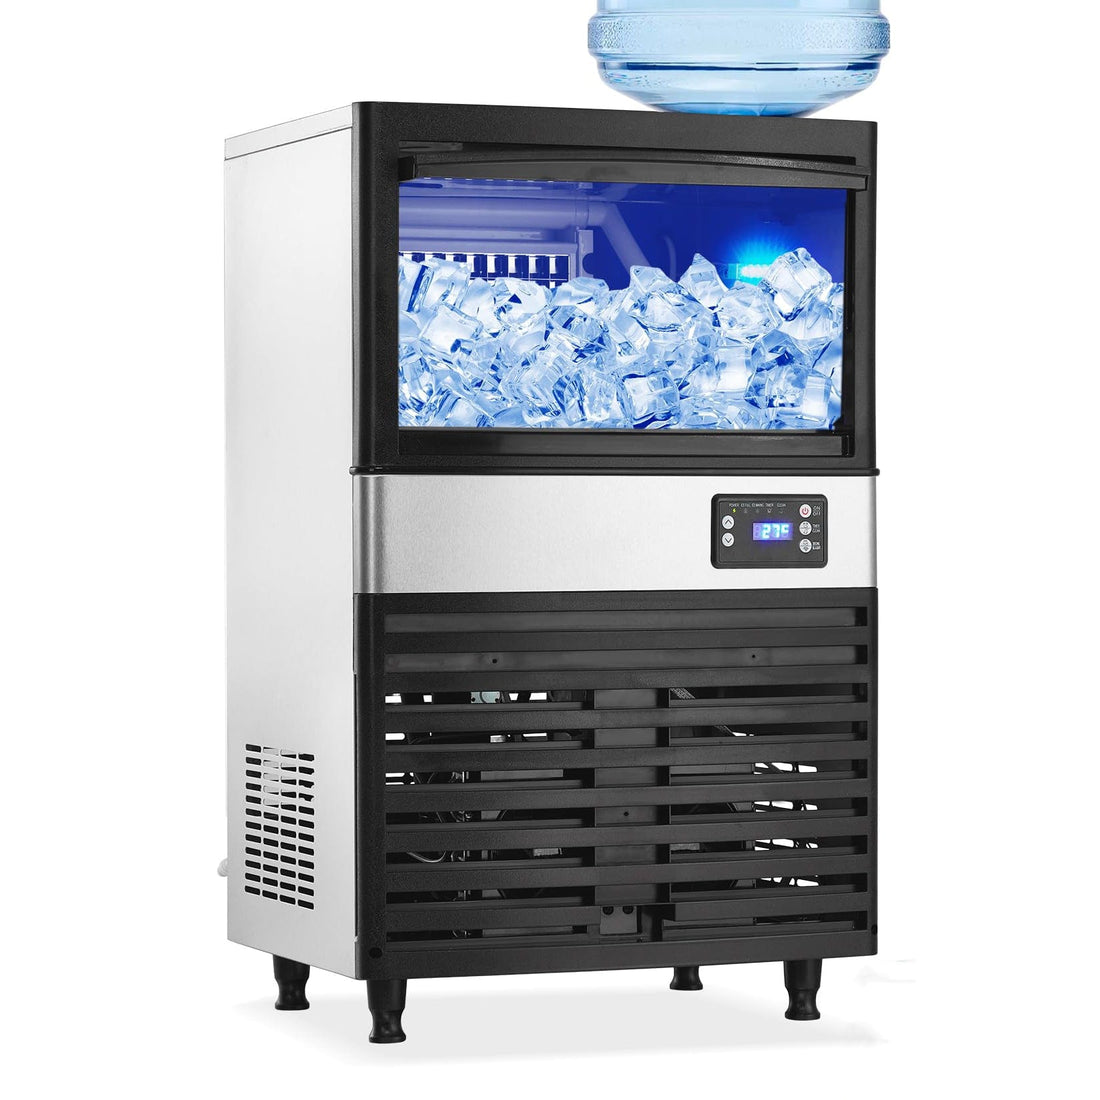 GARVEE 120Lbs/24H, Ice Maker, 26lbs Bin, 60 Clear Cubes, Stainless Steel, Under Counter, 2 Inlet Modes, Ideal for Home/Party/Bar/Restaurant